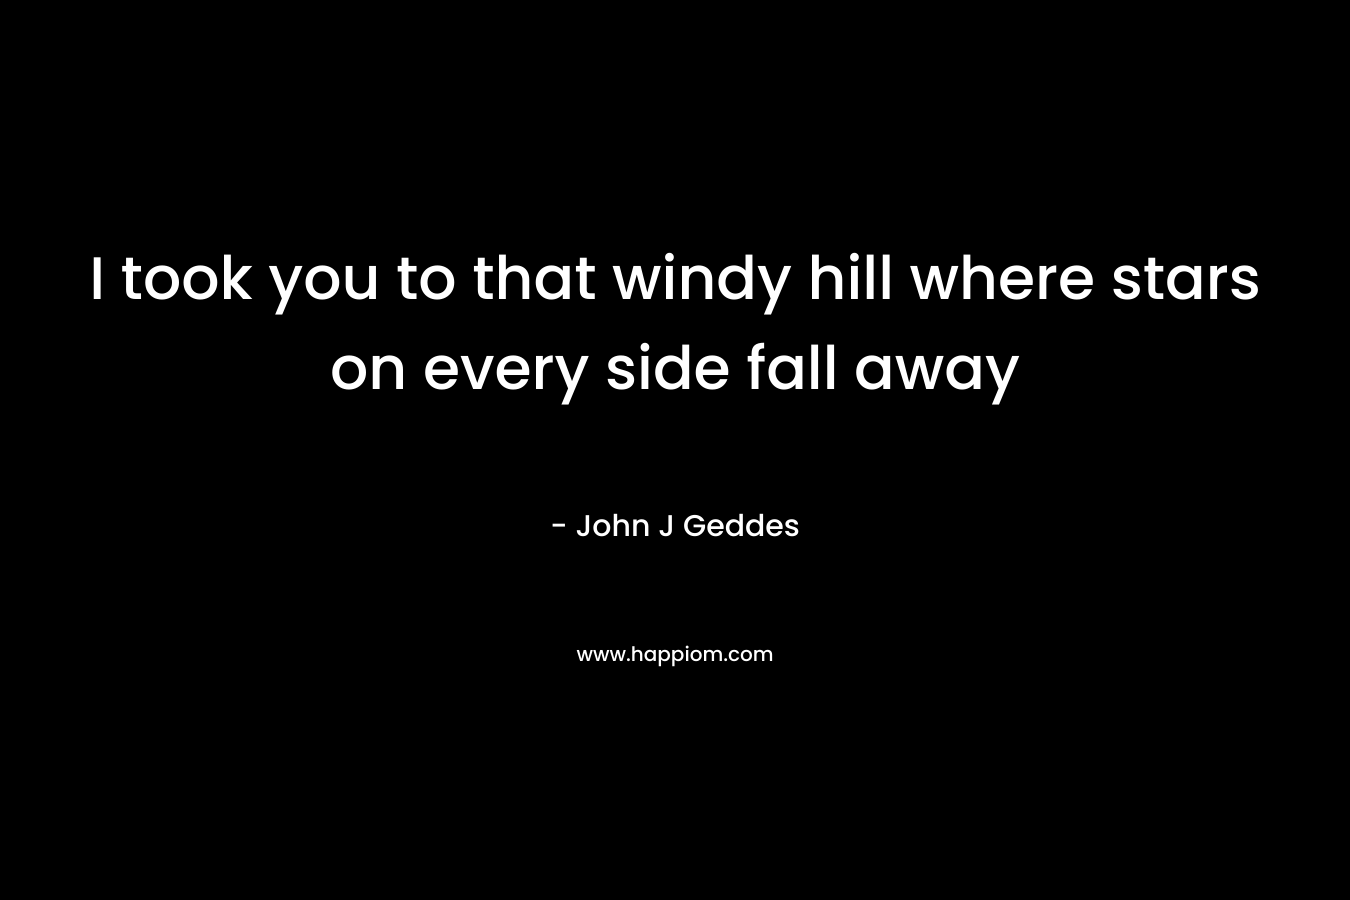 I took you to that windy hill where stars on every side fall away – John J Geddes